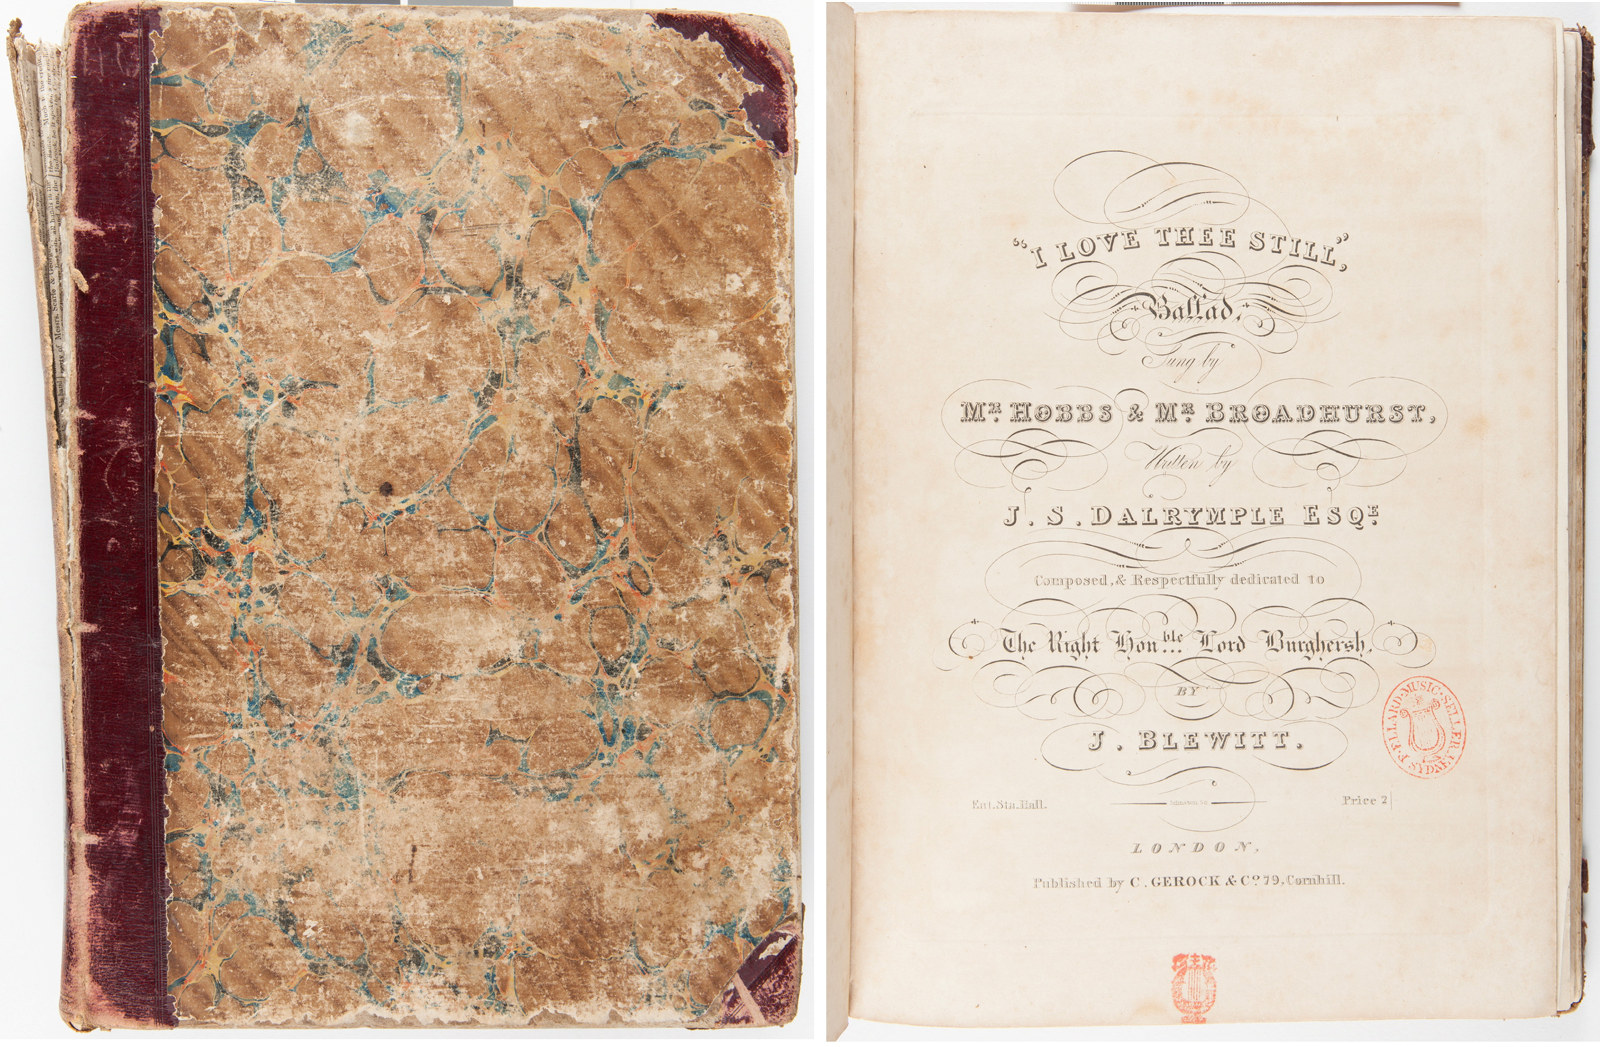 Composite image of front cover and title page of aged songbook.